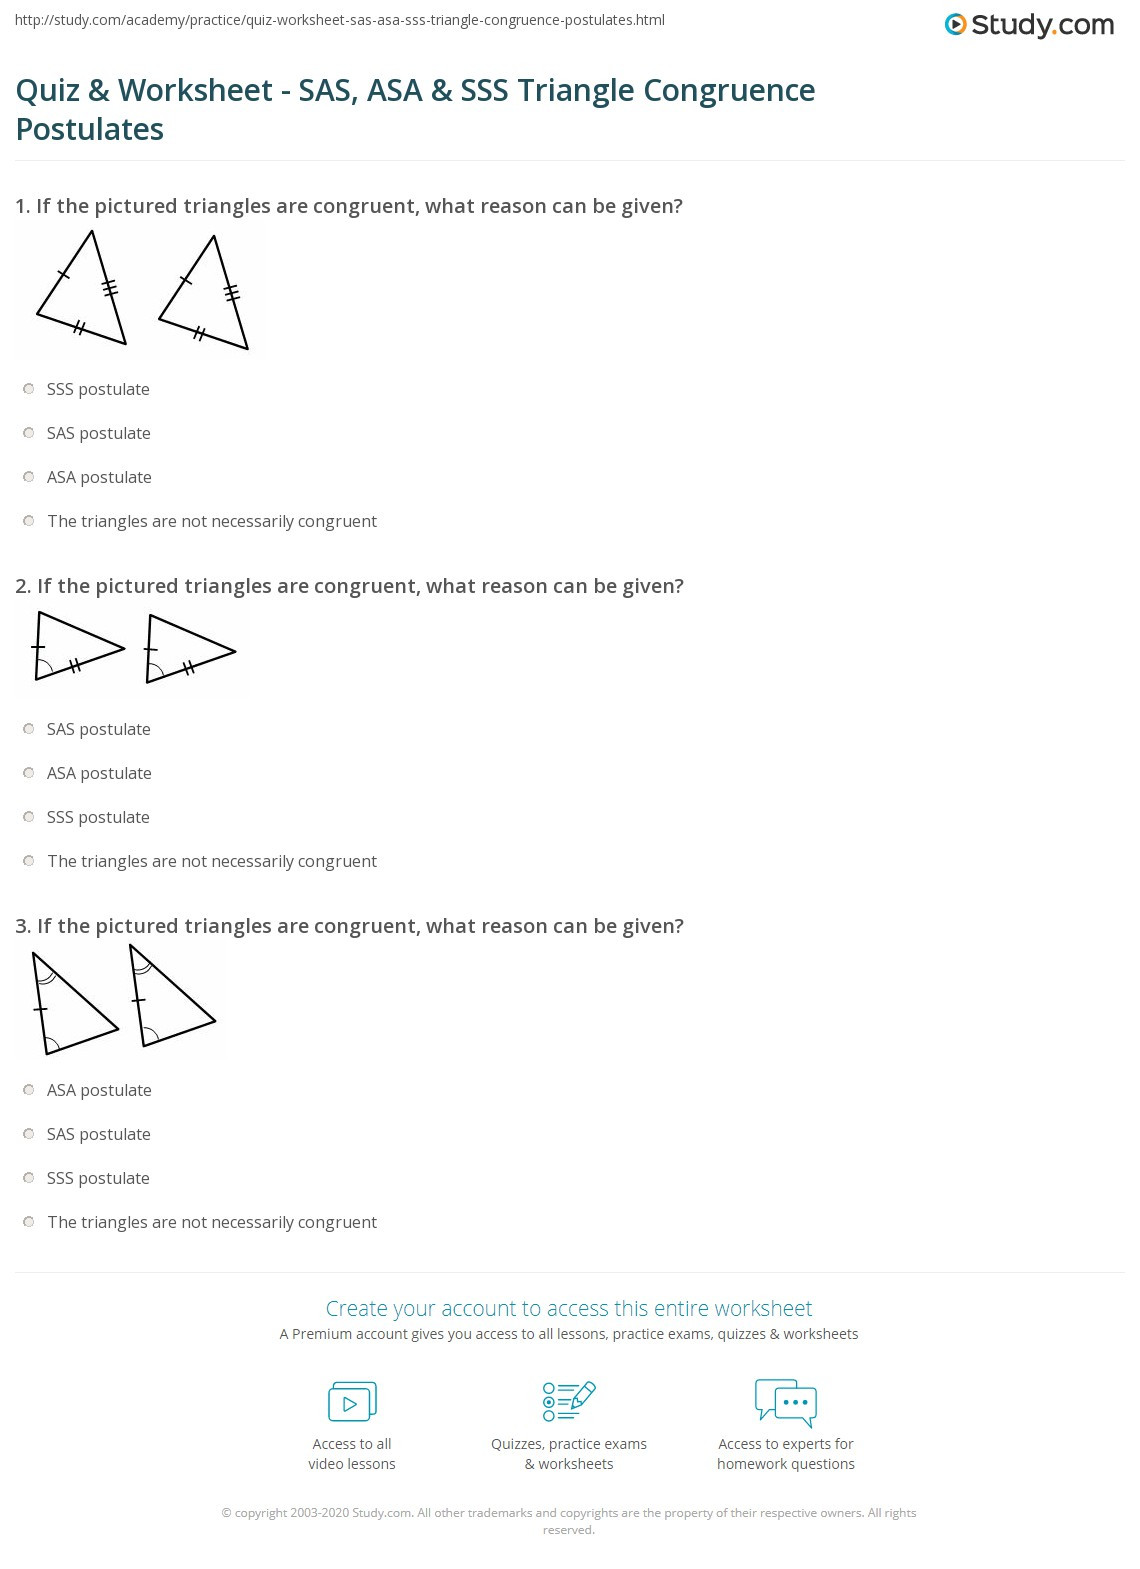 Congruent Triangles Worksheet Answer Key Quiz &amp; Worksheet Sas asa &amp; Sss Triangle Congruence